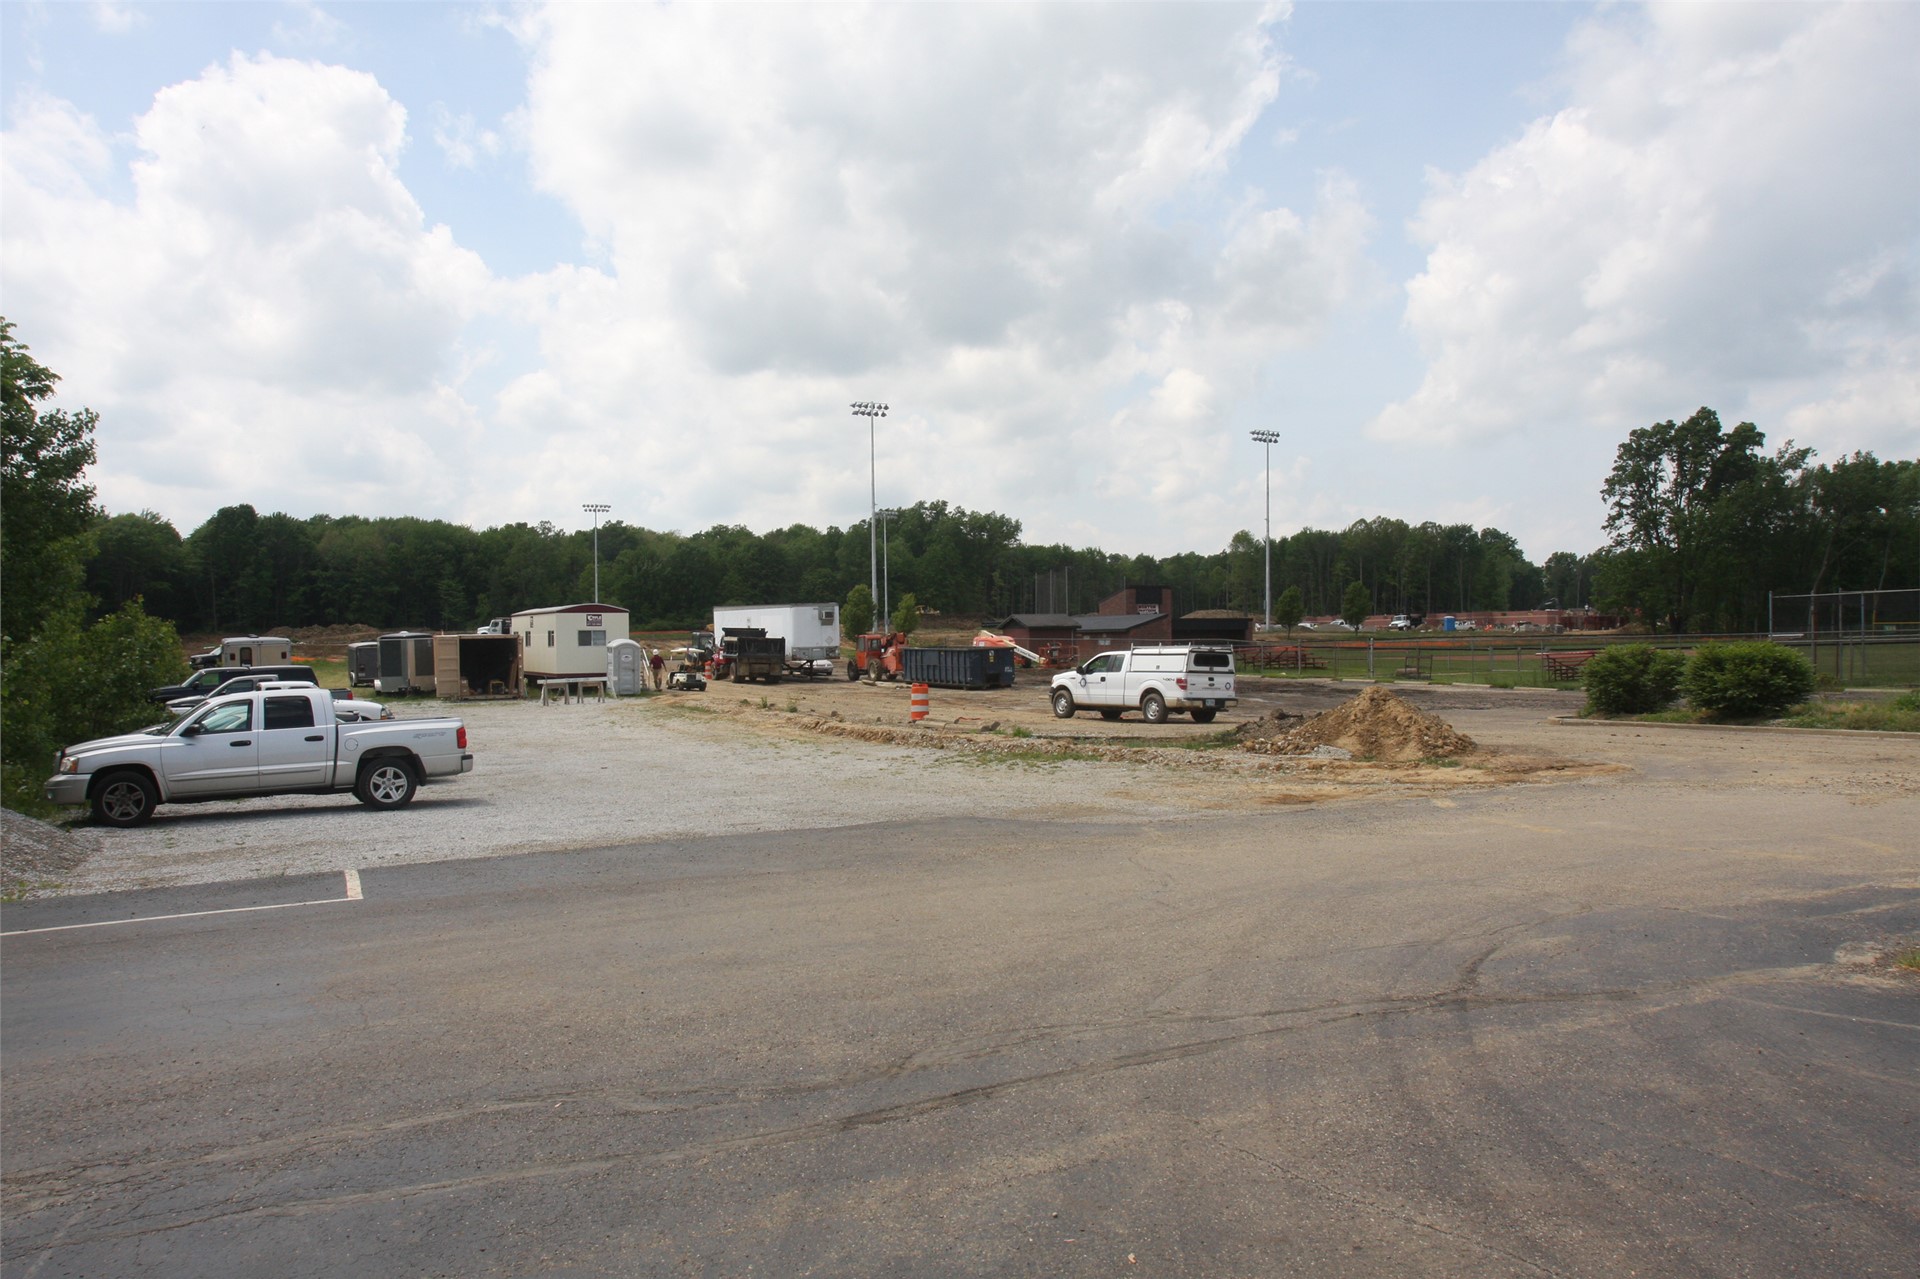 View of stadium and baseball field from Grace Church parking lot